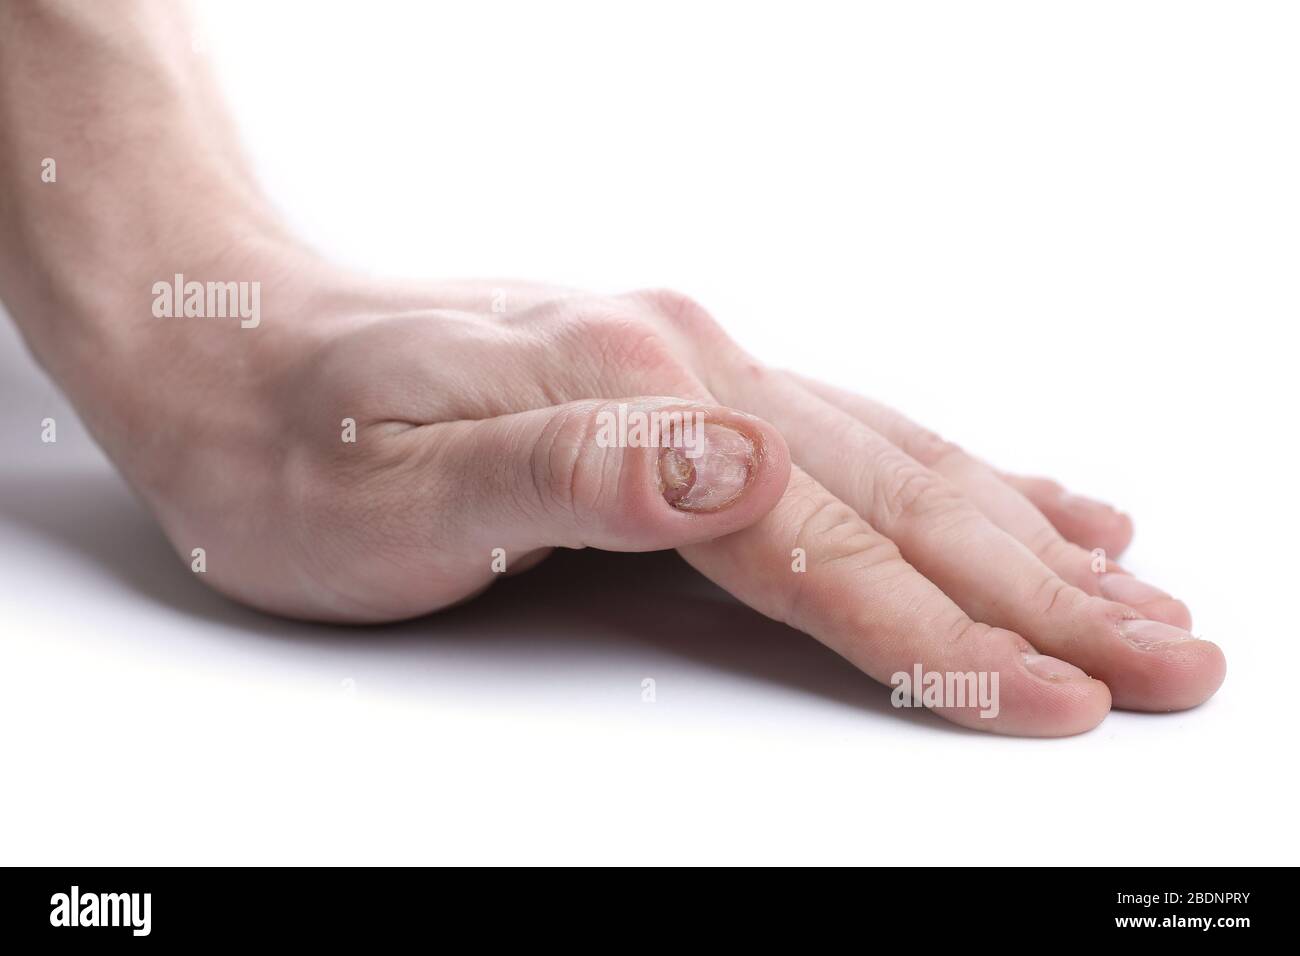 Fungal Nail Infection and Damage on Human Hand. Finger with Onychomycosis,  Disgusting Bitten Fingernails on Man`s Hand Stock Photo - Image of bitten,  ciclopirox: 92516850